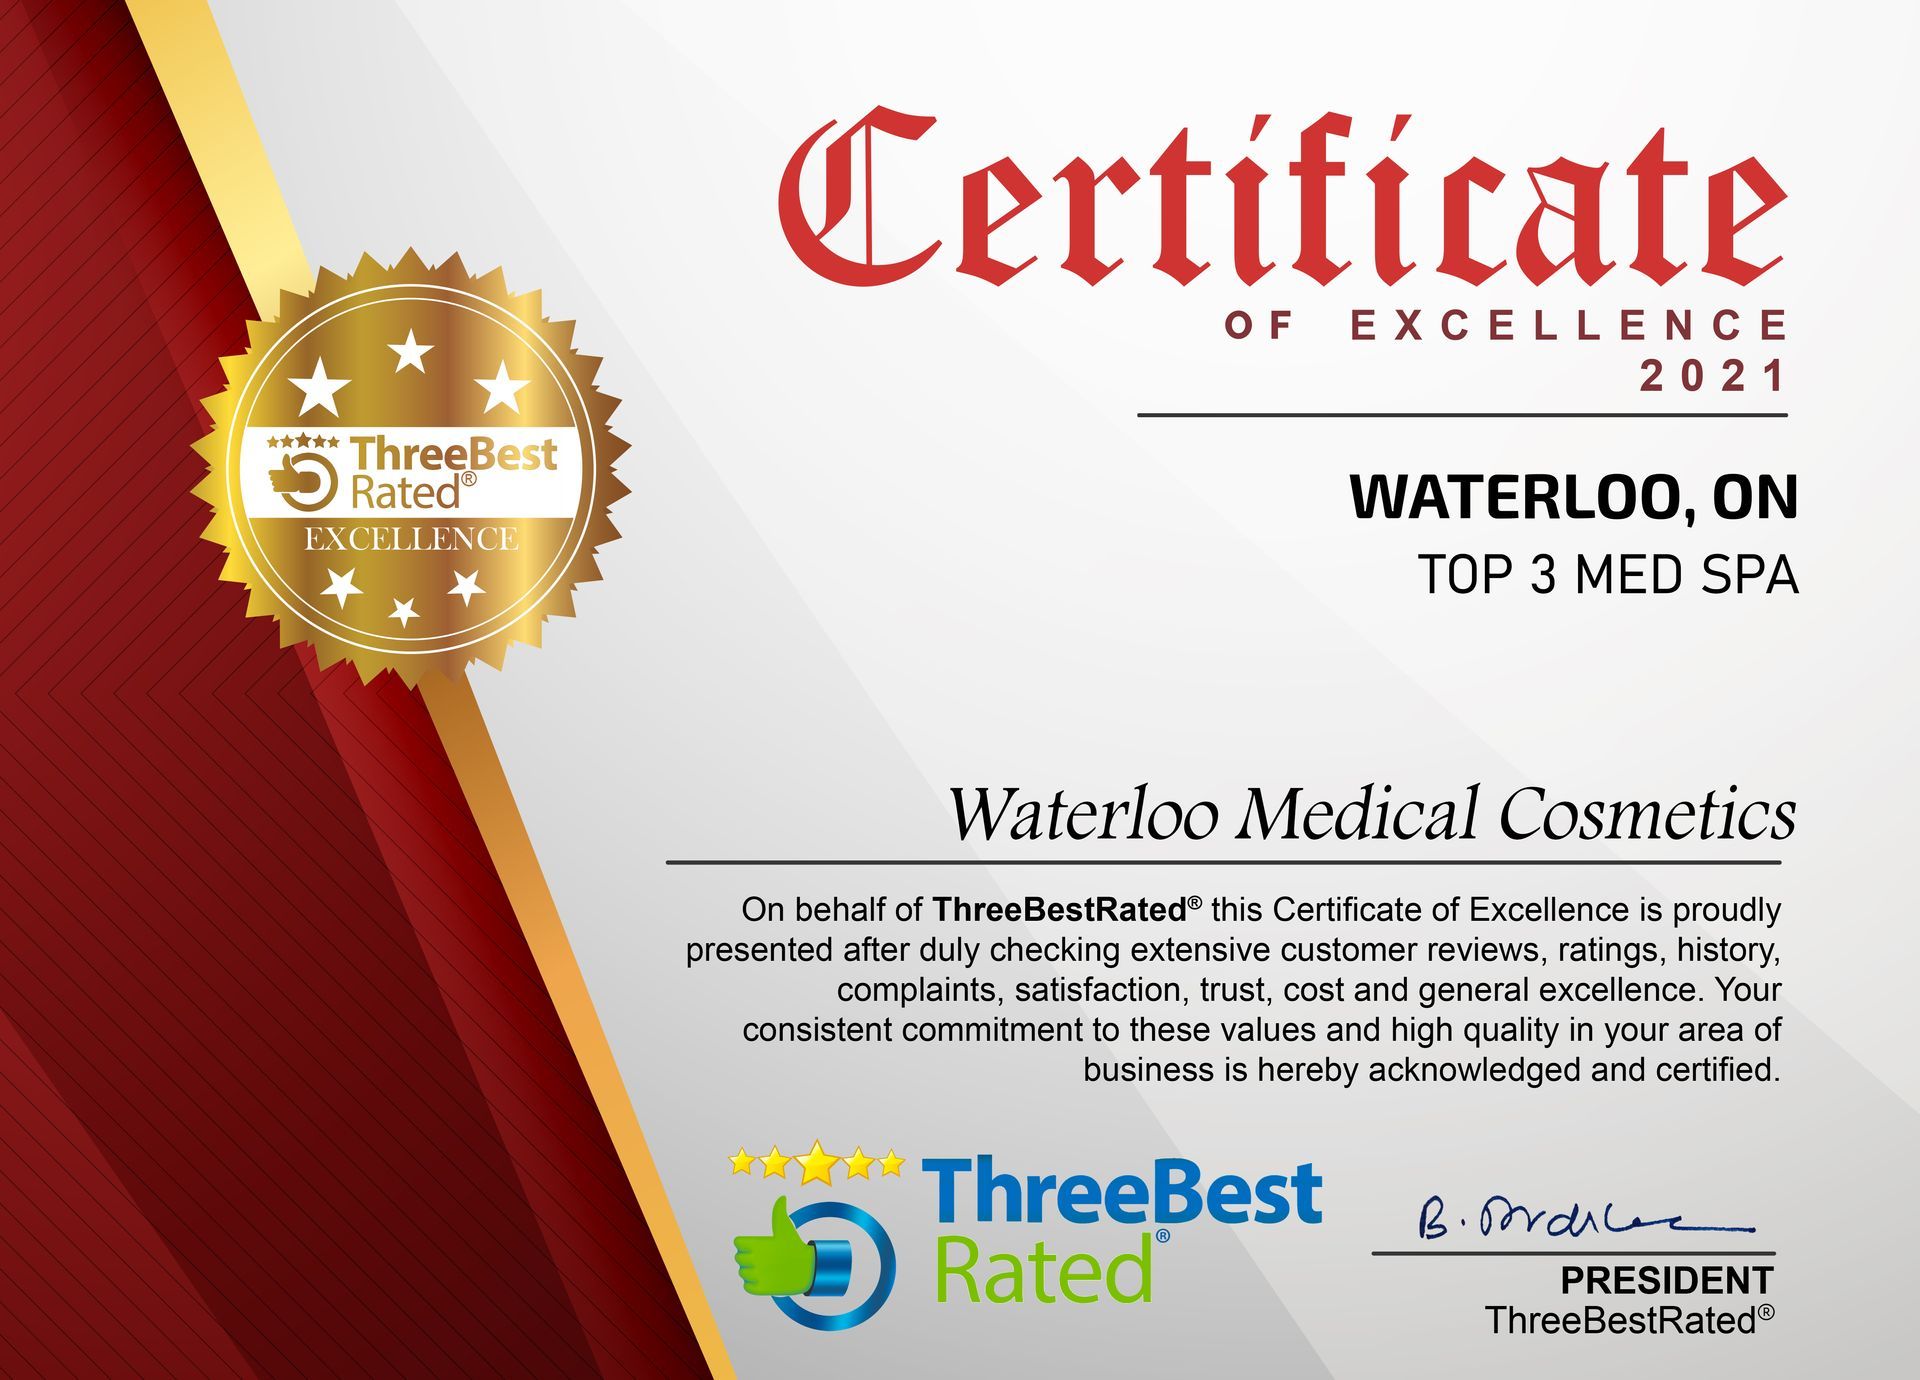 A seal that says best business of 2021 three best rated waterloo medical cosmetics excellence